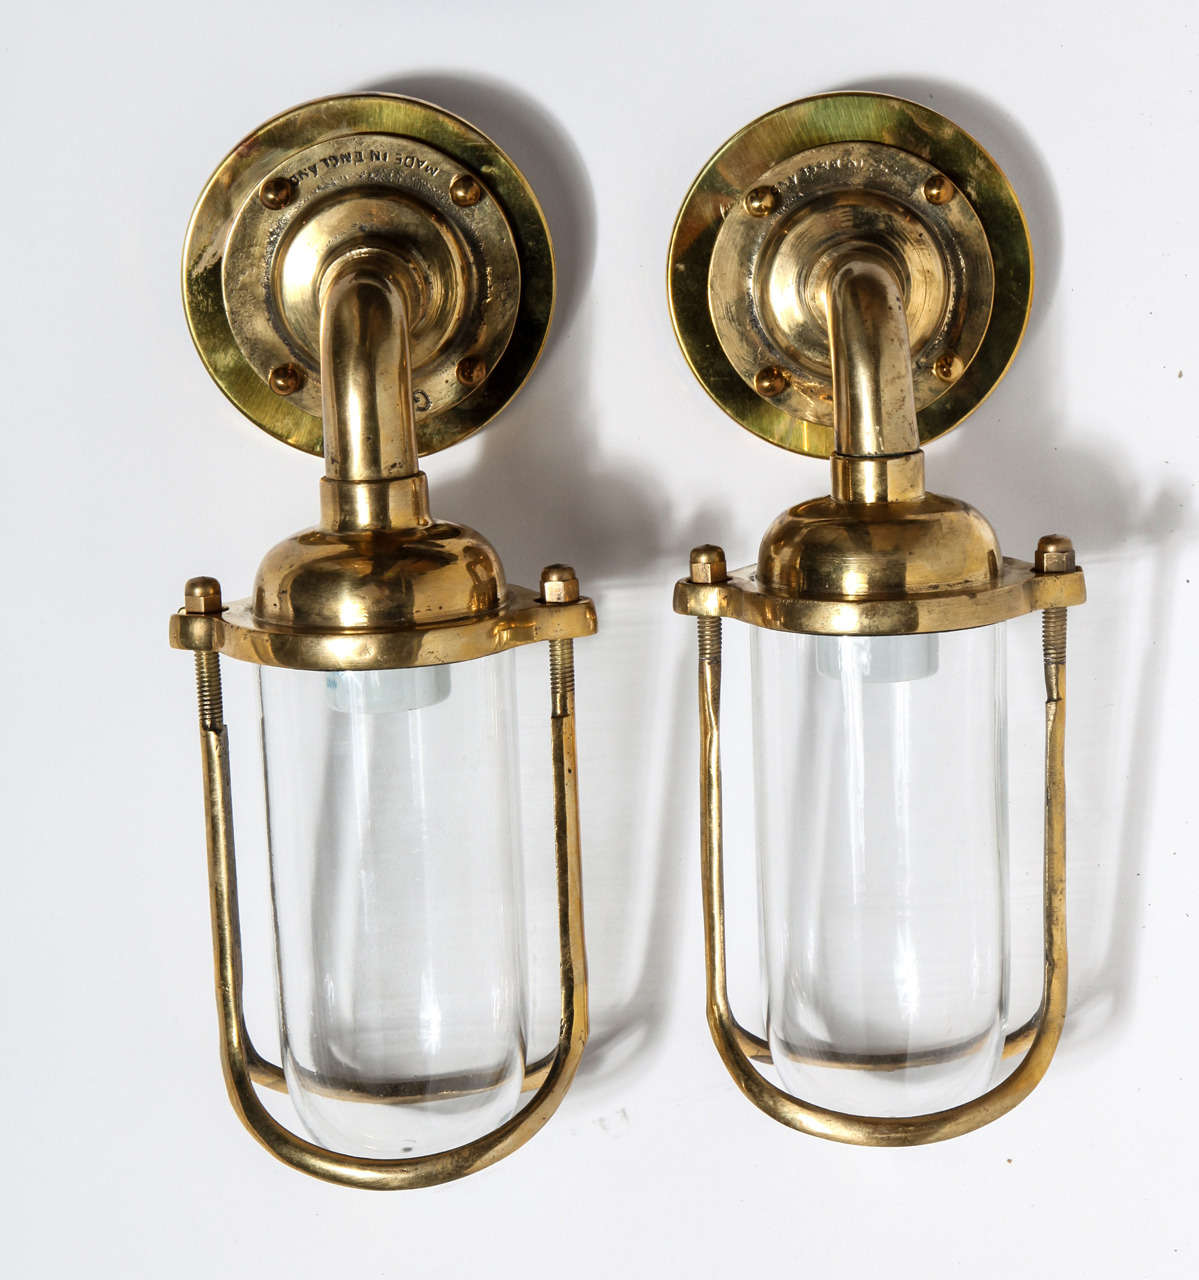 Glass and brass antique sconces featuring cast manufacturers mark 